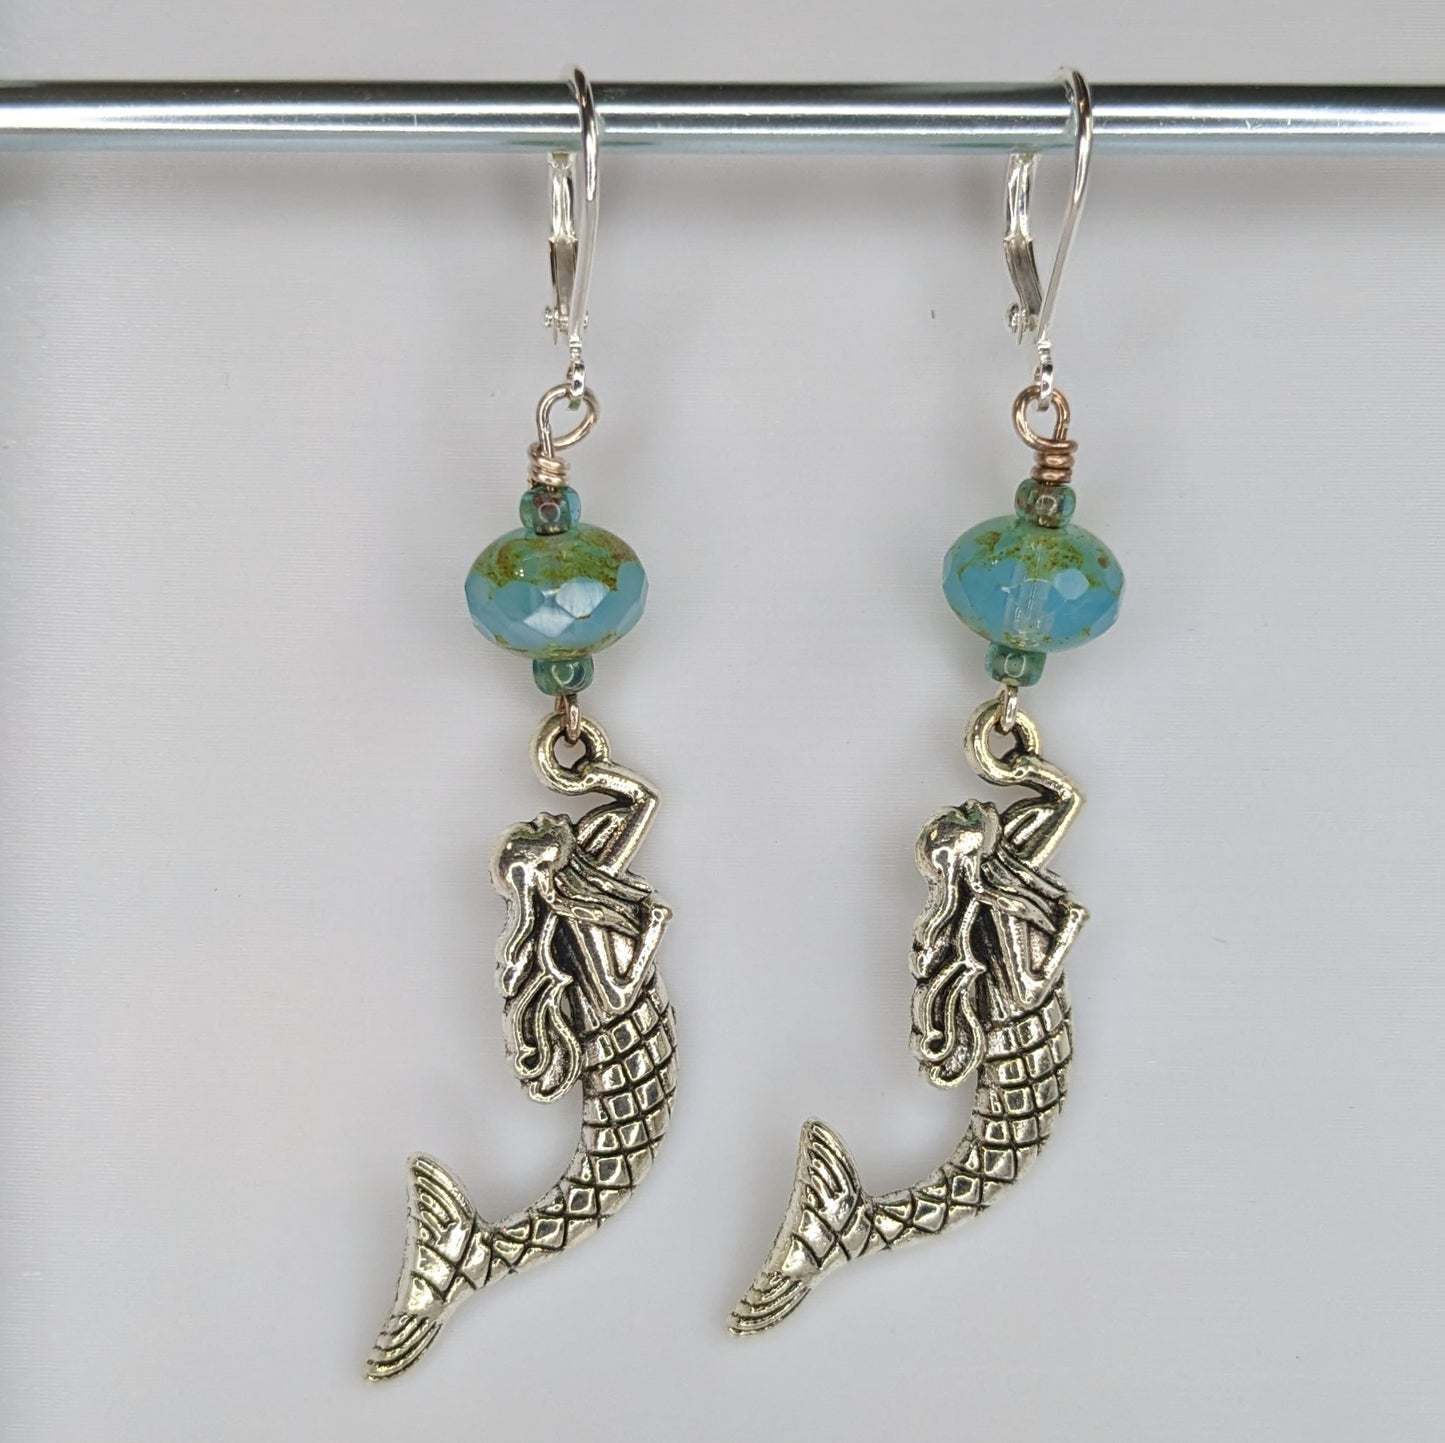 Part of Your World Earrings & Stitch Markers: Mermaids